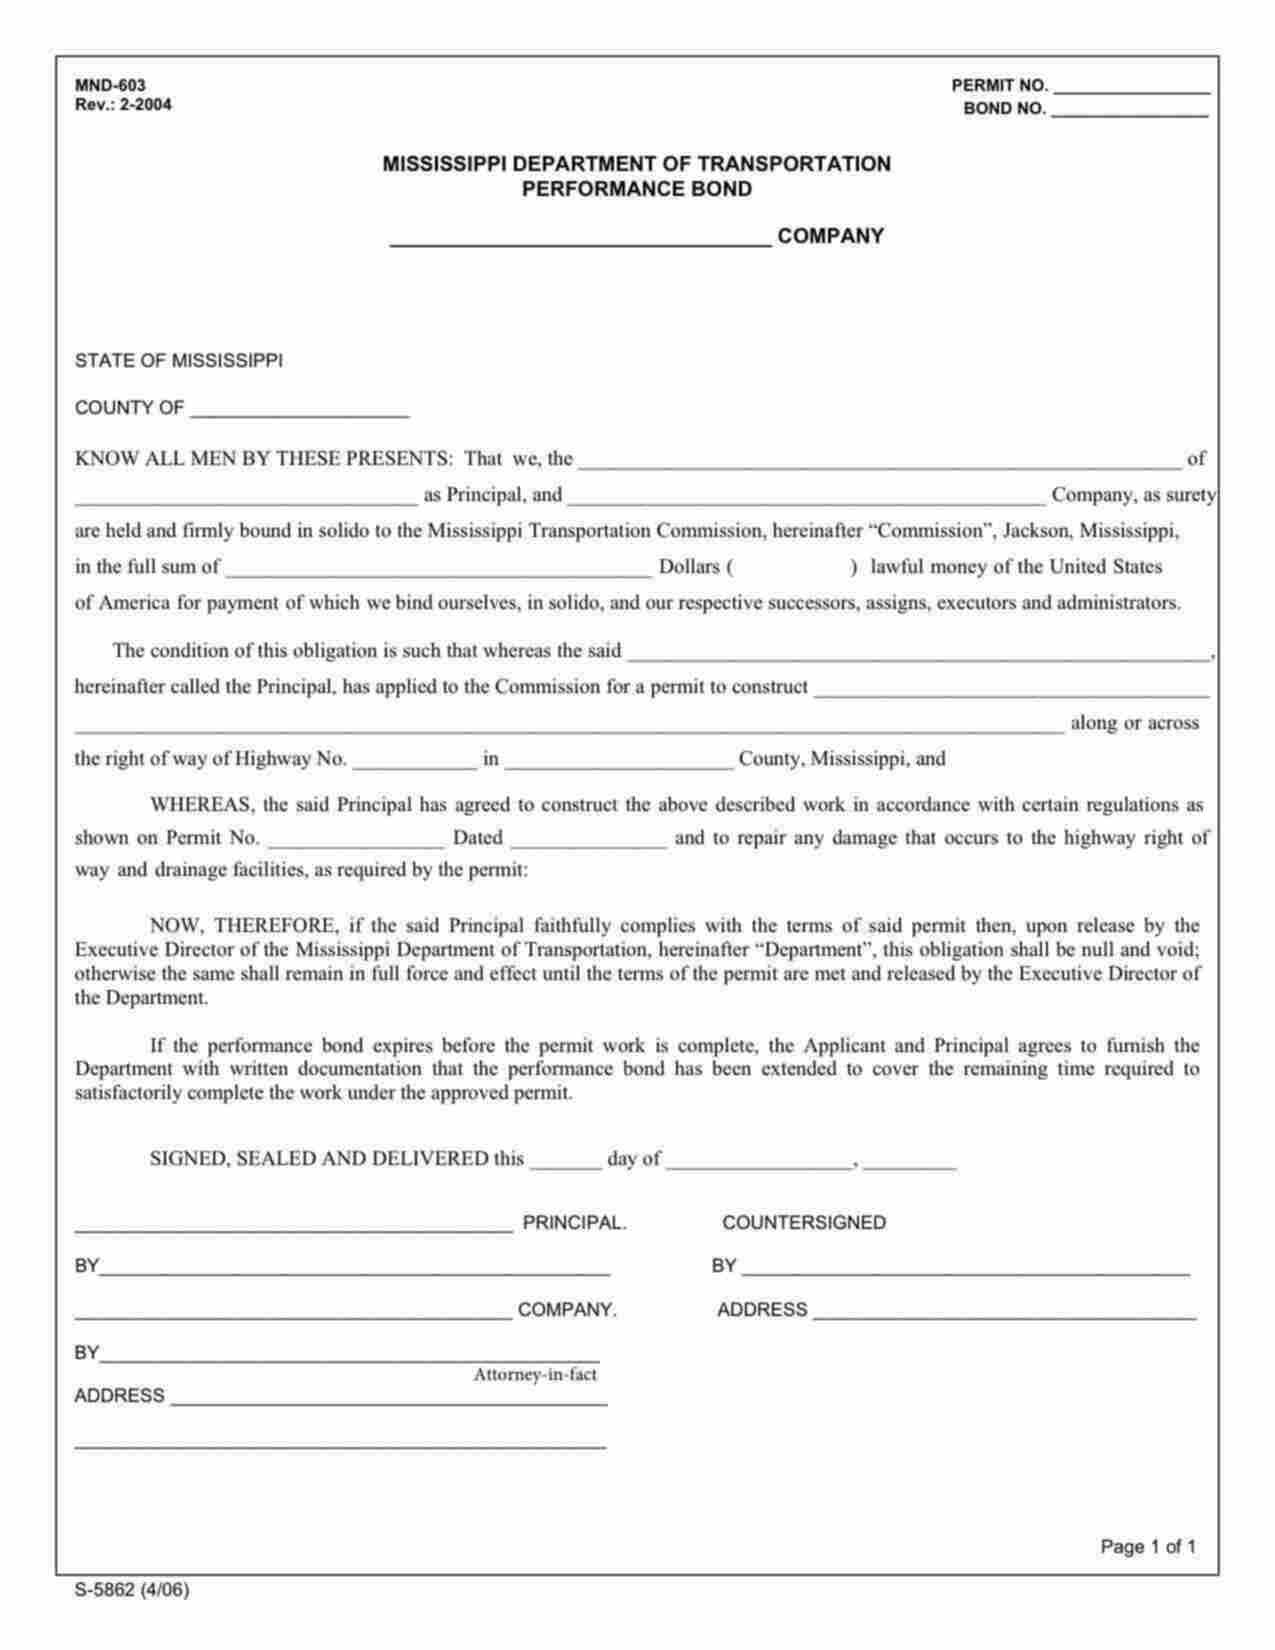 Mississippi Right of Way Performance Bond Form